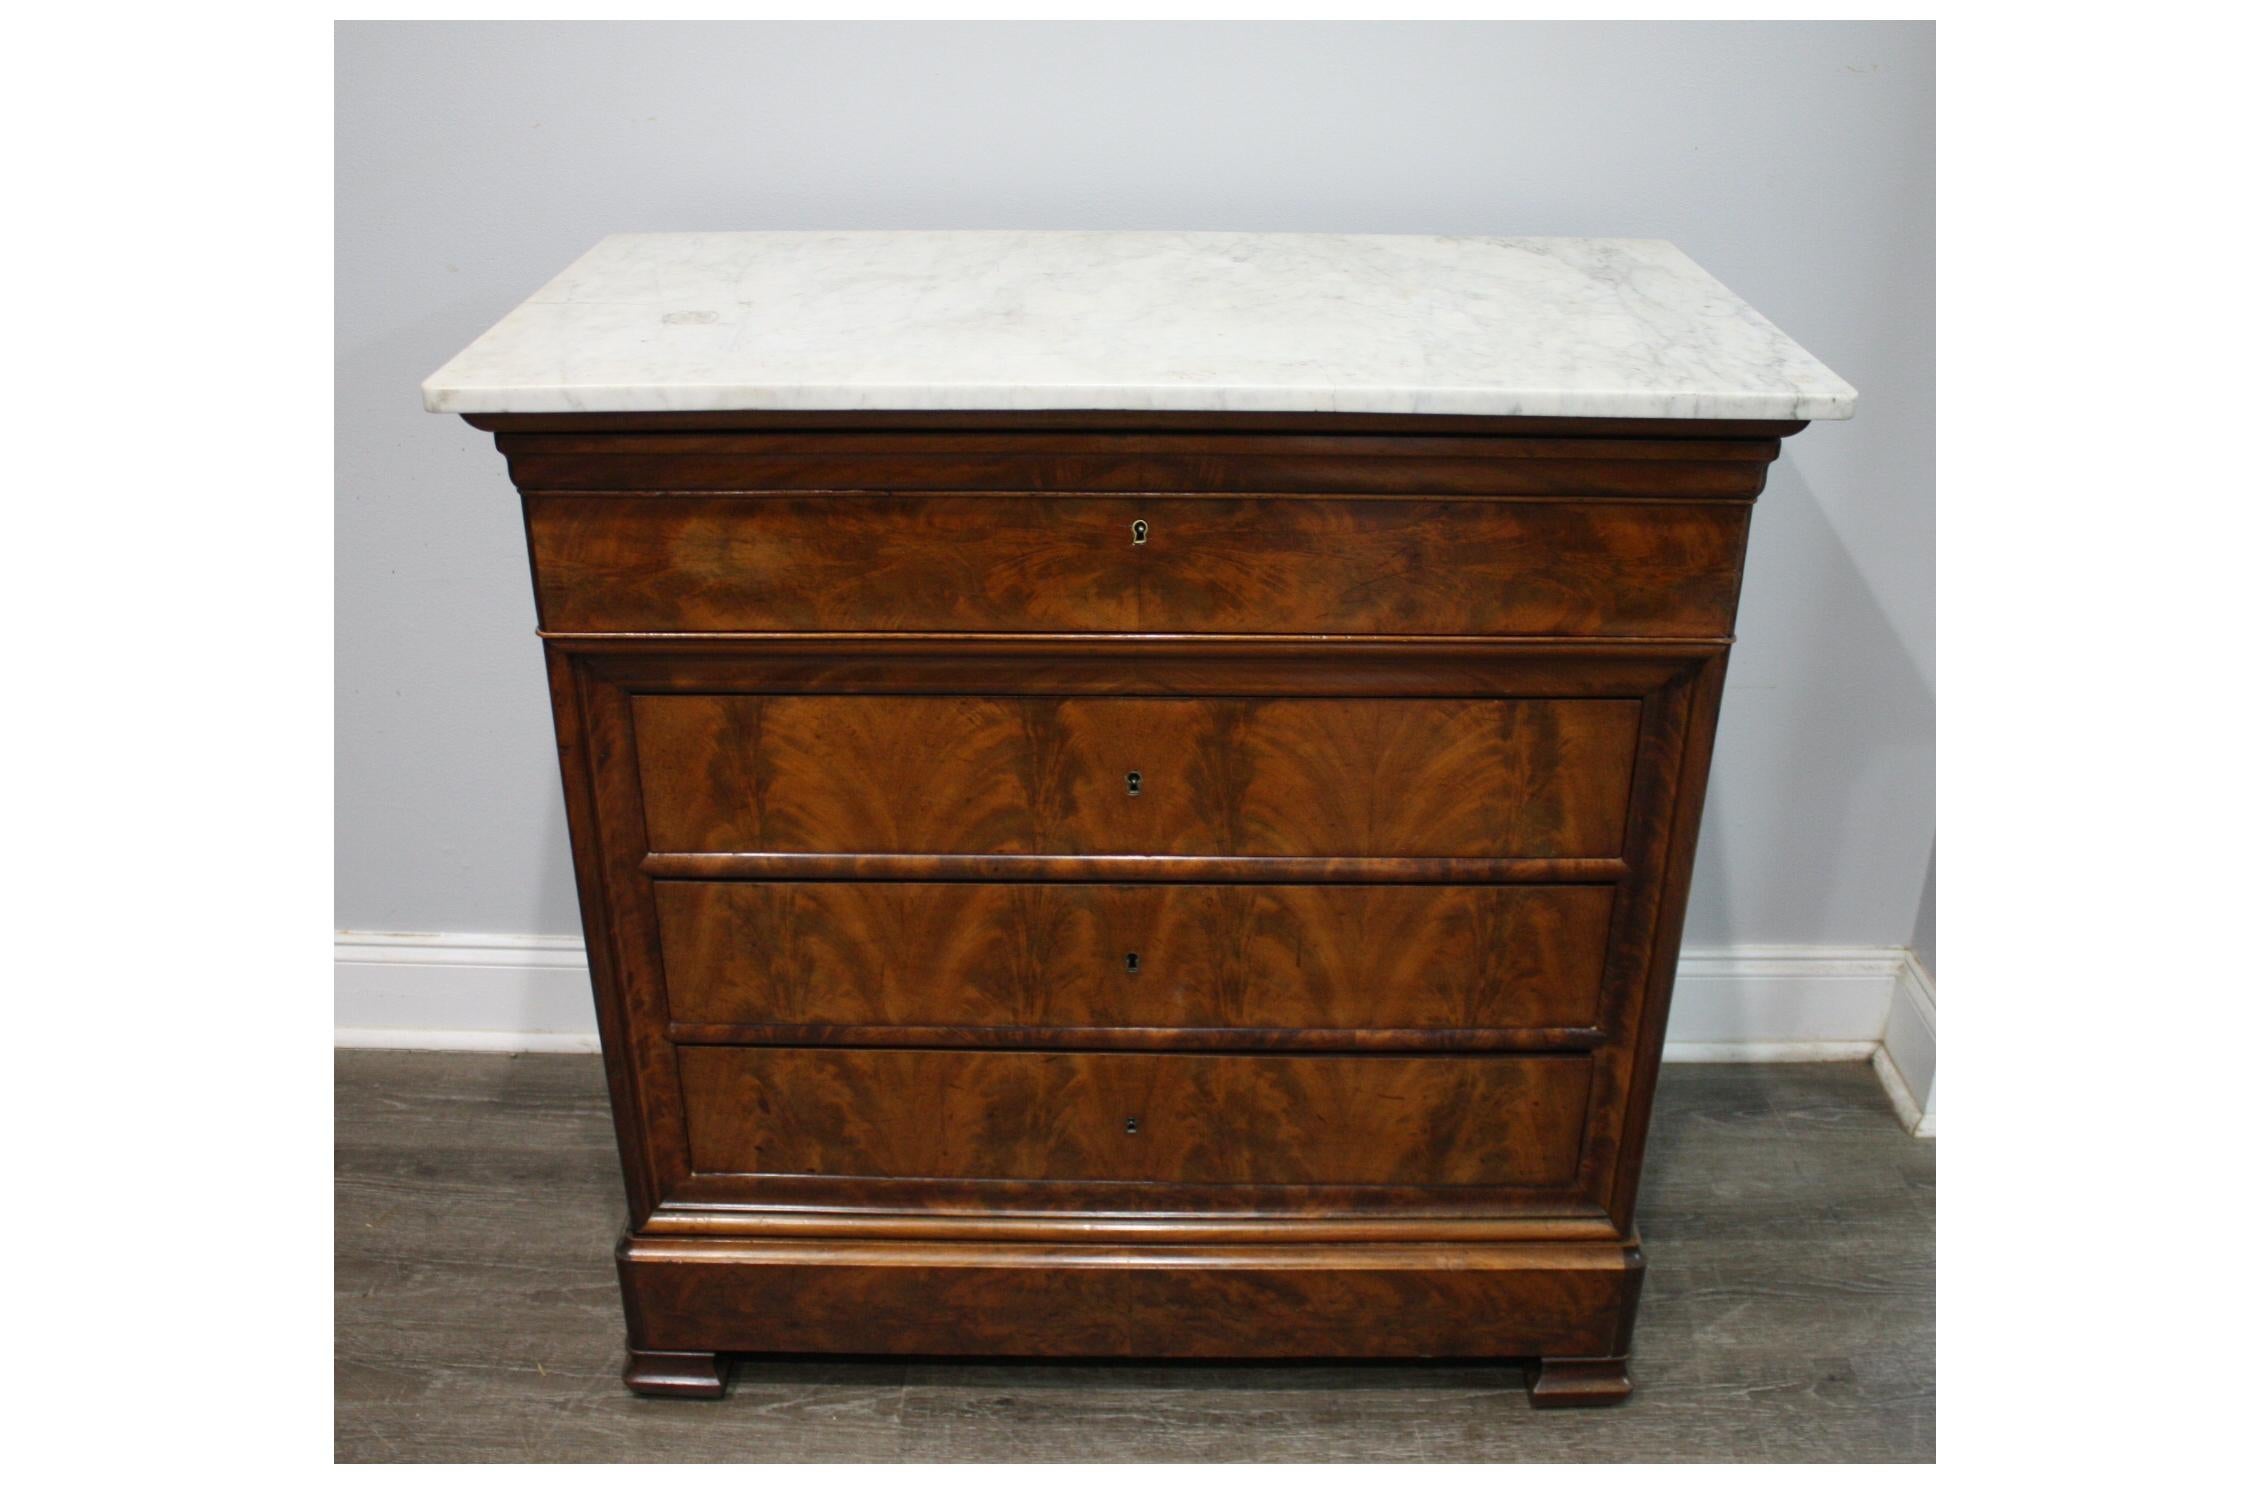 This Louis-Philippe Chest wears a beautiful white marble top with grey veins.
It is as well a desk with a wonderful burl wood and a light brown velvet fabric.